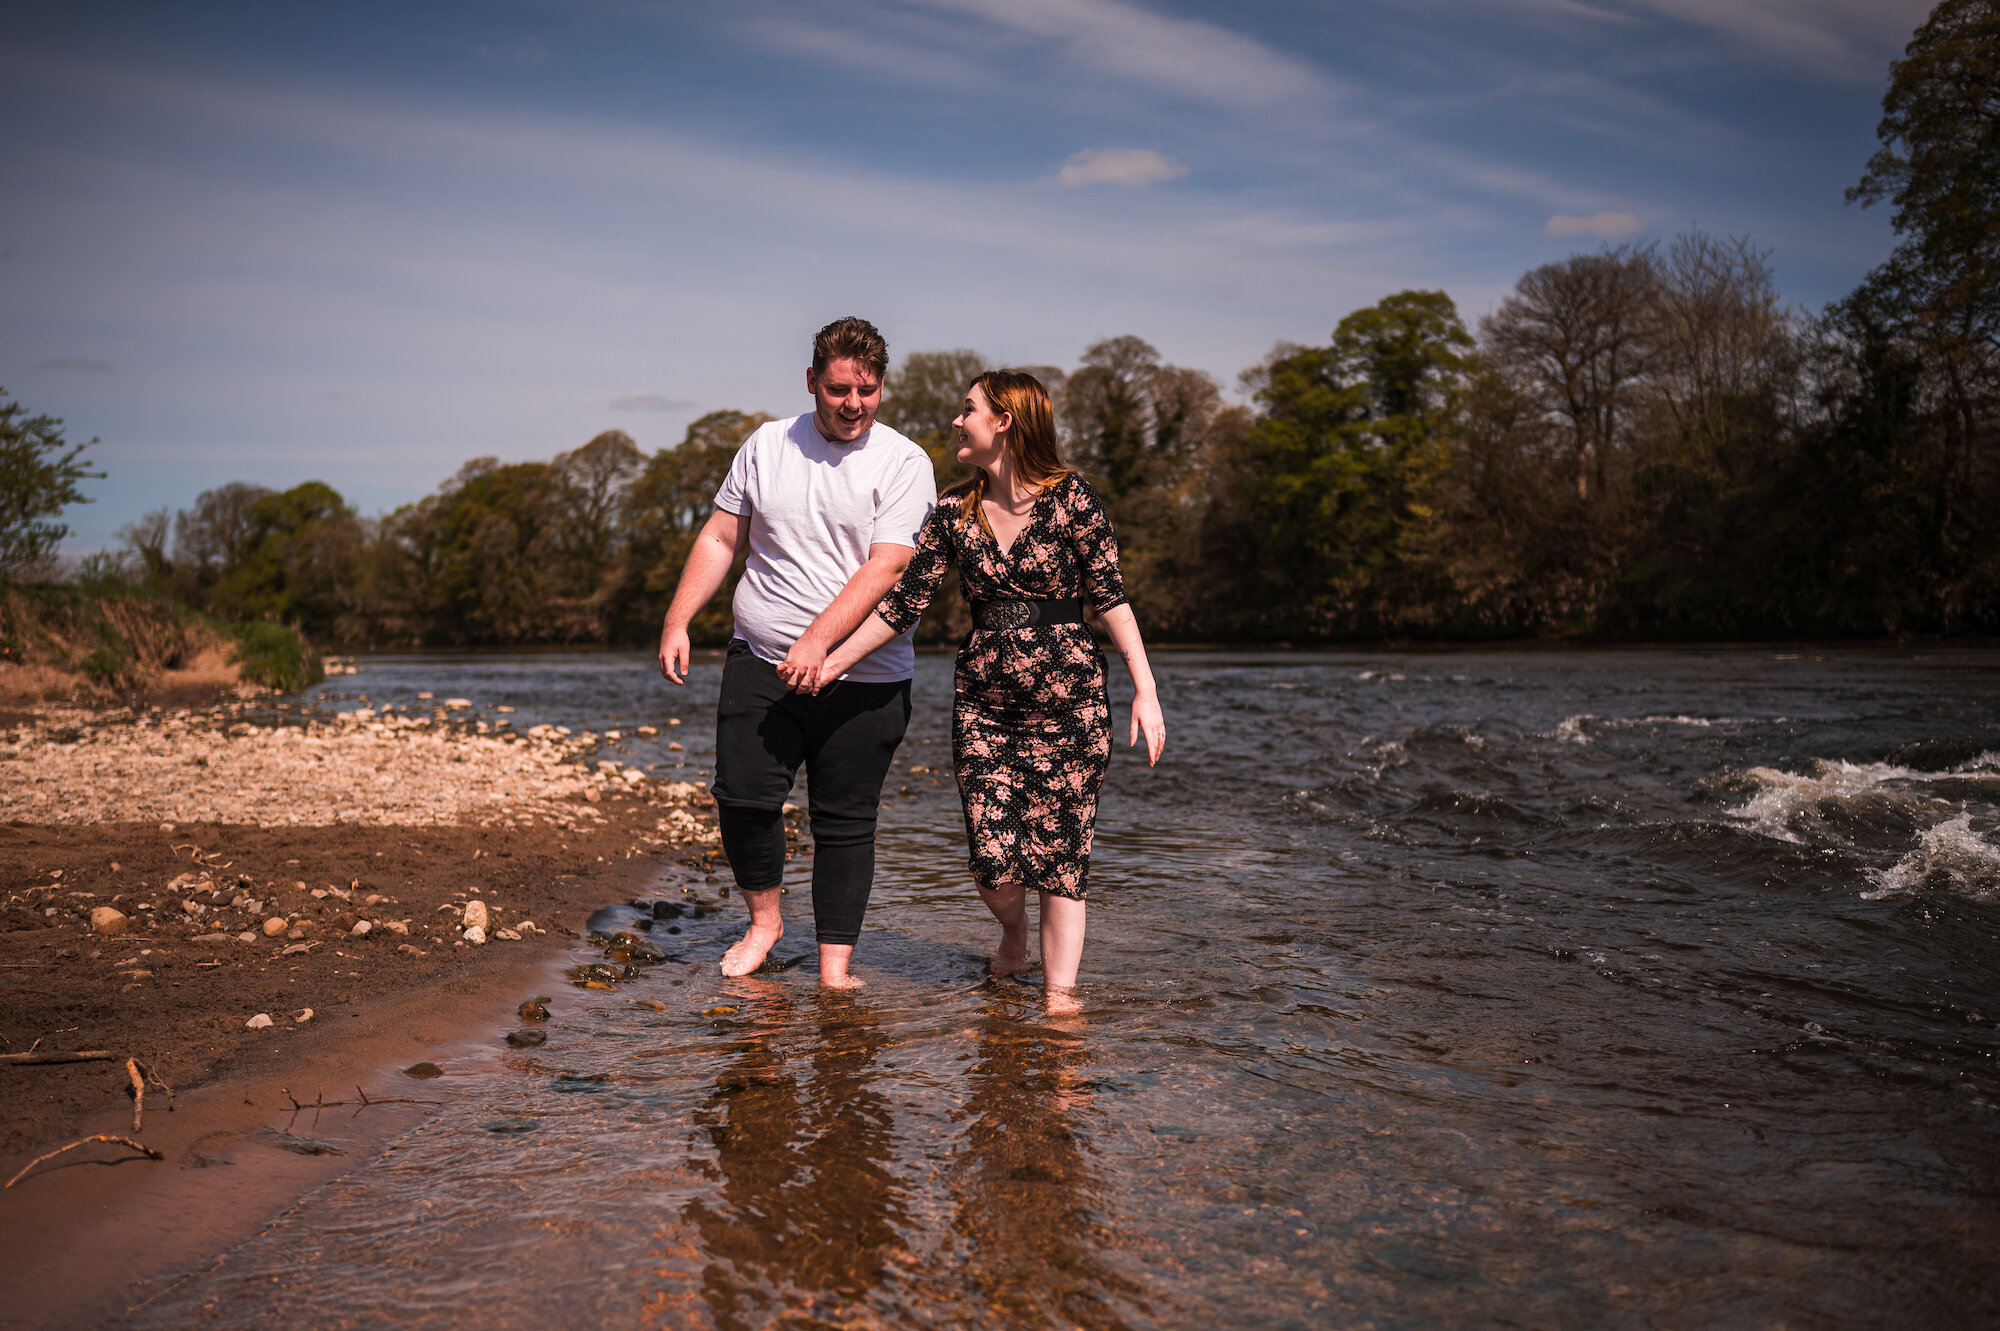 Ellisse and James walking in the river shallows